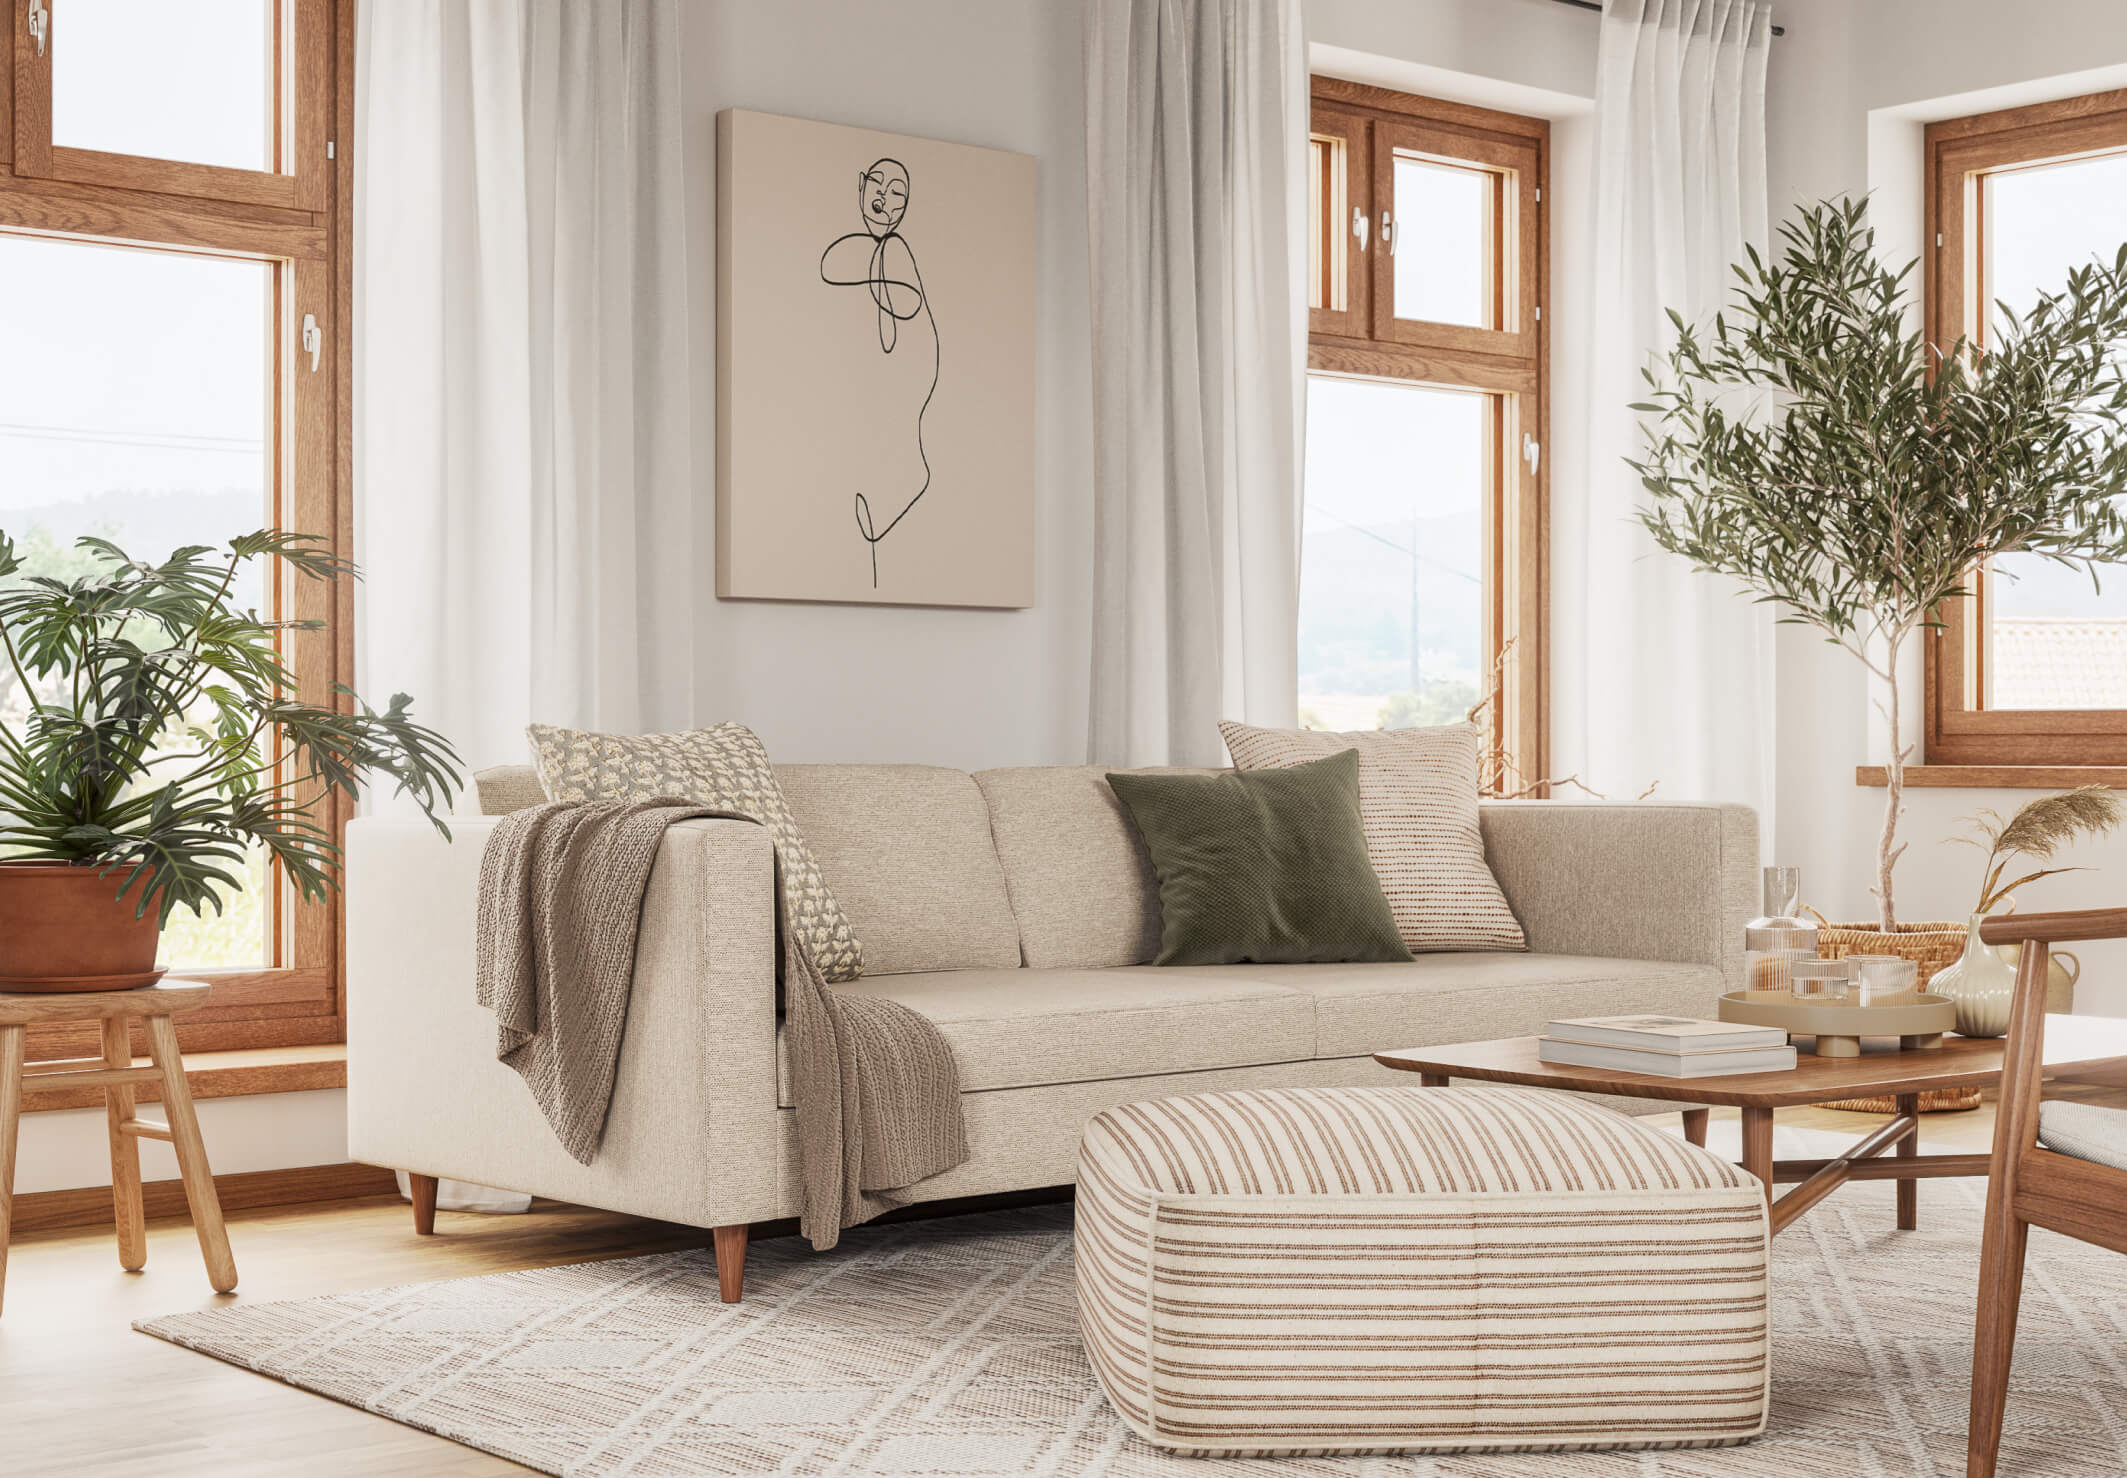 A bright living room with large windows features a beige sectional sofa adorned with various pillows and a throw blanket. A striped ottoman sits on a patterned rug in front of the sofa, and potted plants are placed around the room. A minimalist wall art hangs above the sofa.